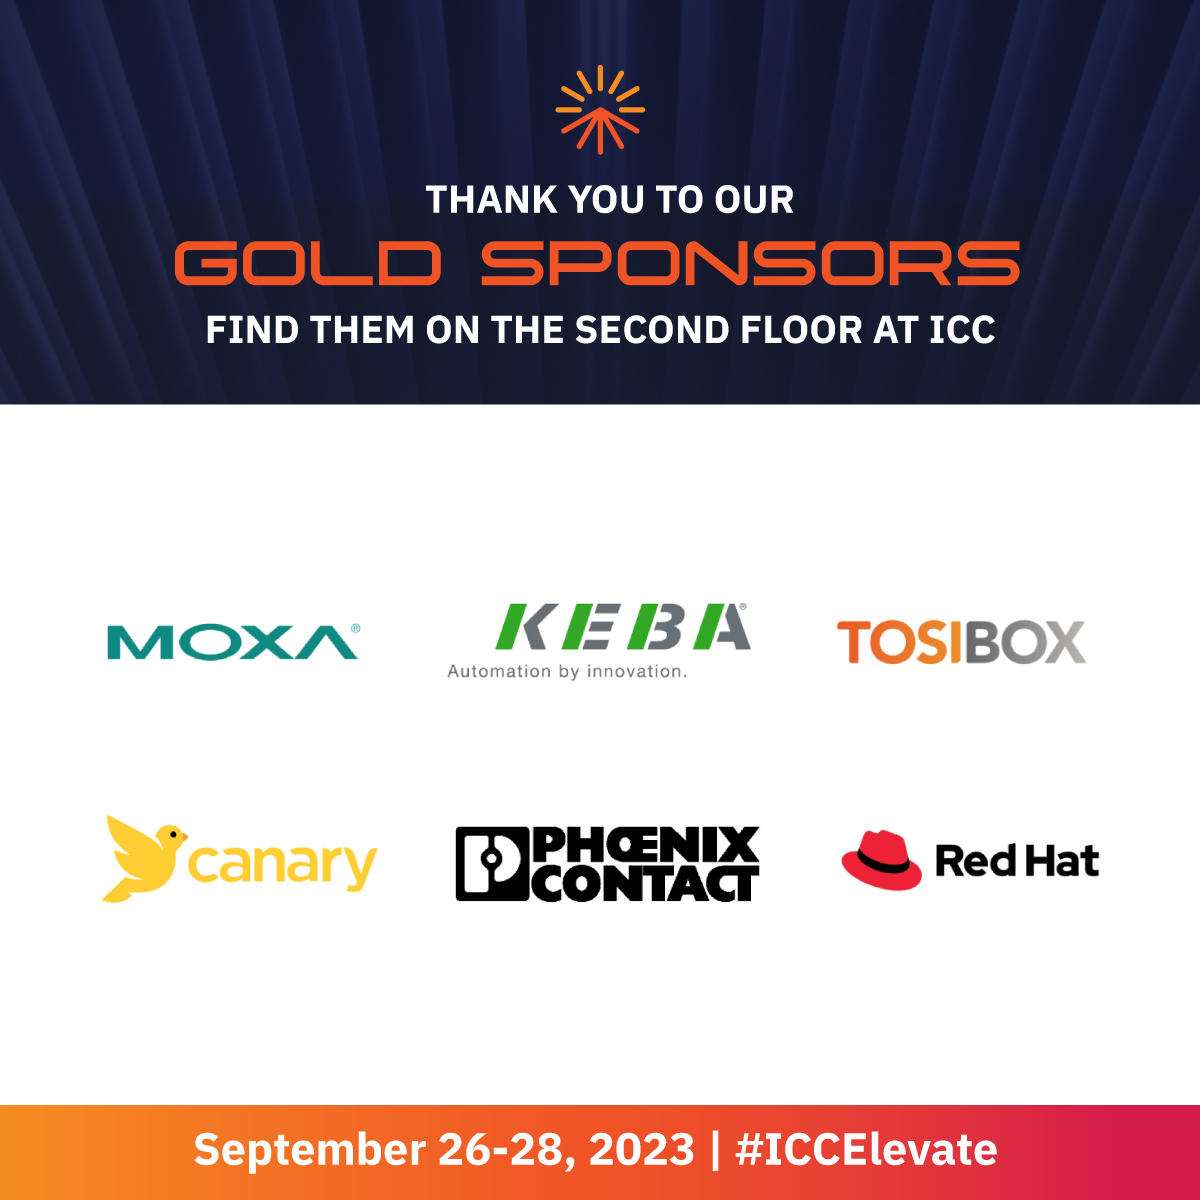 🥇 A huge thank you to our Gold Sponsors for this year's Ignition Community Conference (#ICCElevate): icc.inductiveautomation.com/#gold

@MoxaInc
@KEBA_Group
@TOSIBOX
@Canarylabs
@PhoenixContact
@RedHat